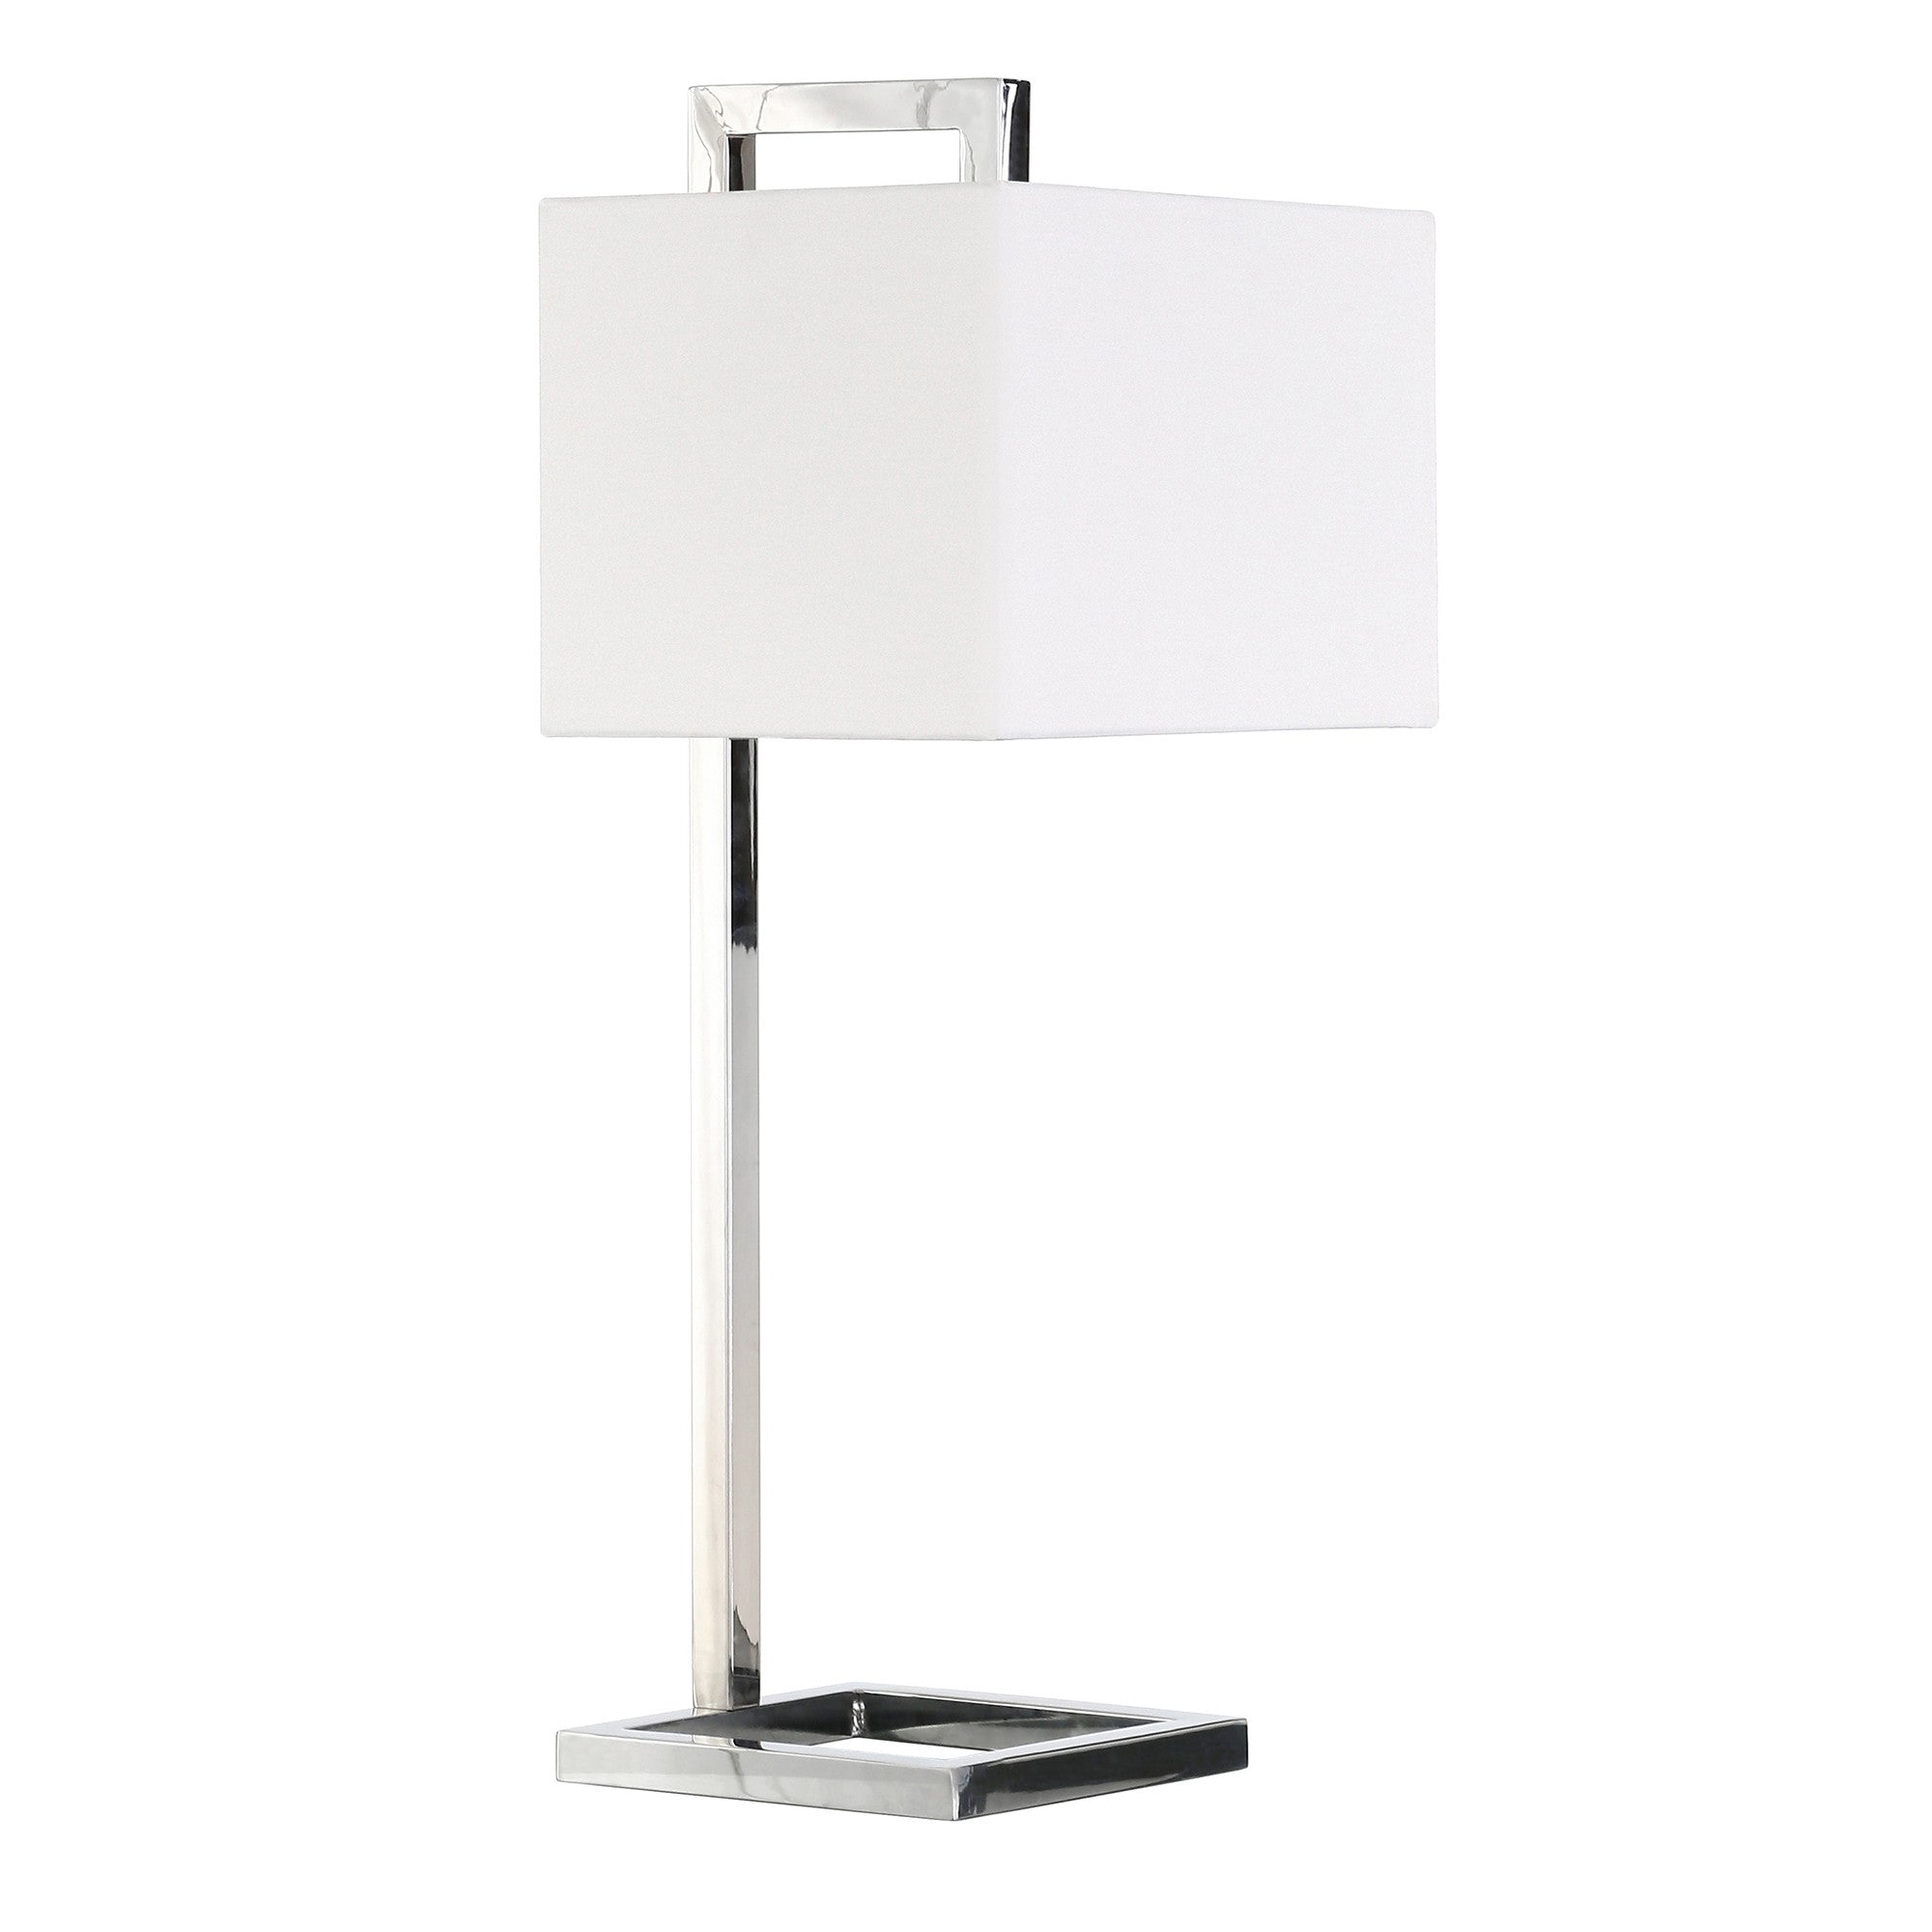 26" Silver Metal Square Arched Table Lamp With White Square Shade